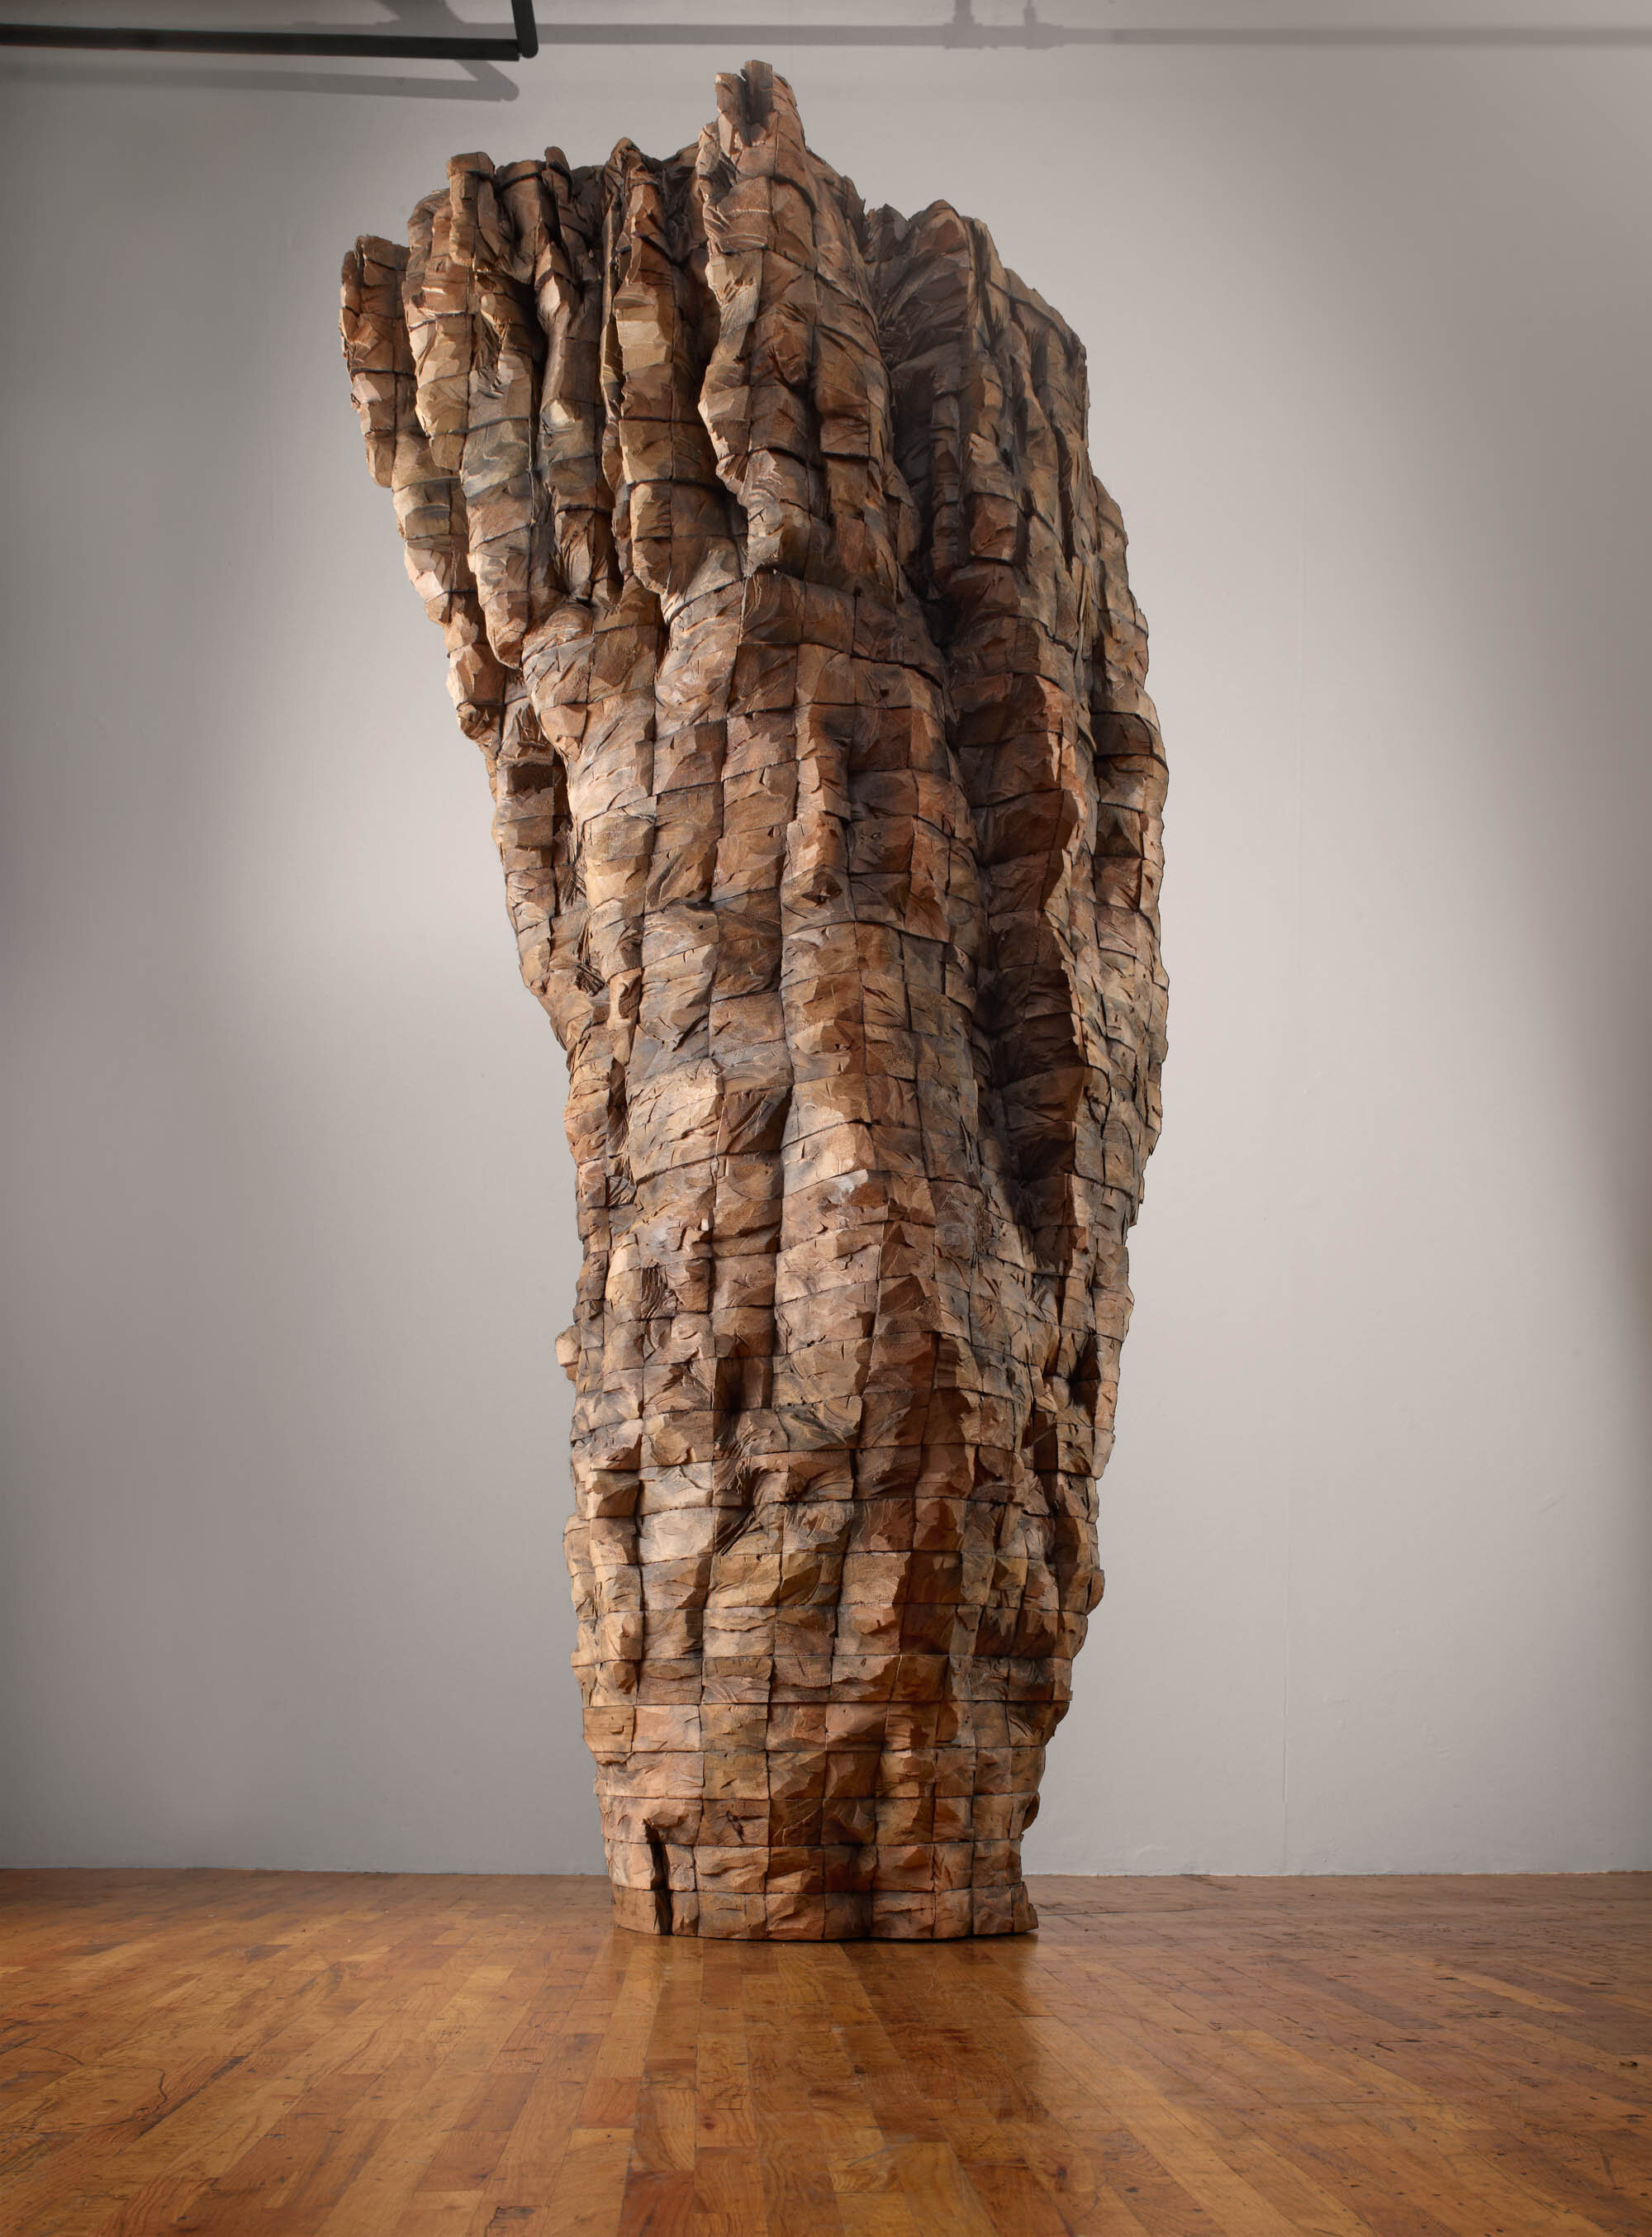       Ocean Voices II , 2013 Cedar and graphite 121 x 57 x 65 in.    MORE IMAGES   Yorkshire Sculpture Park  